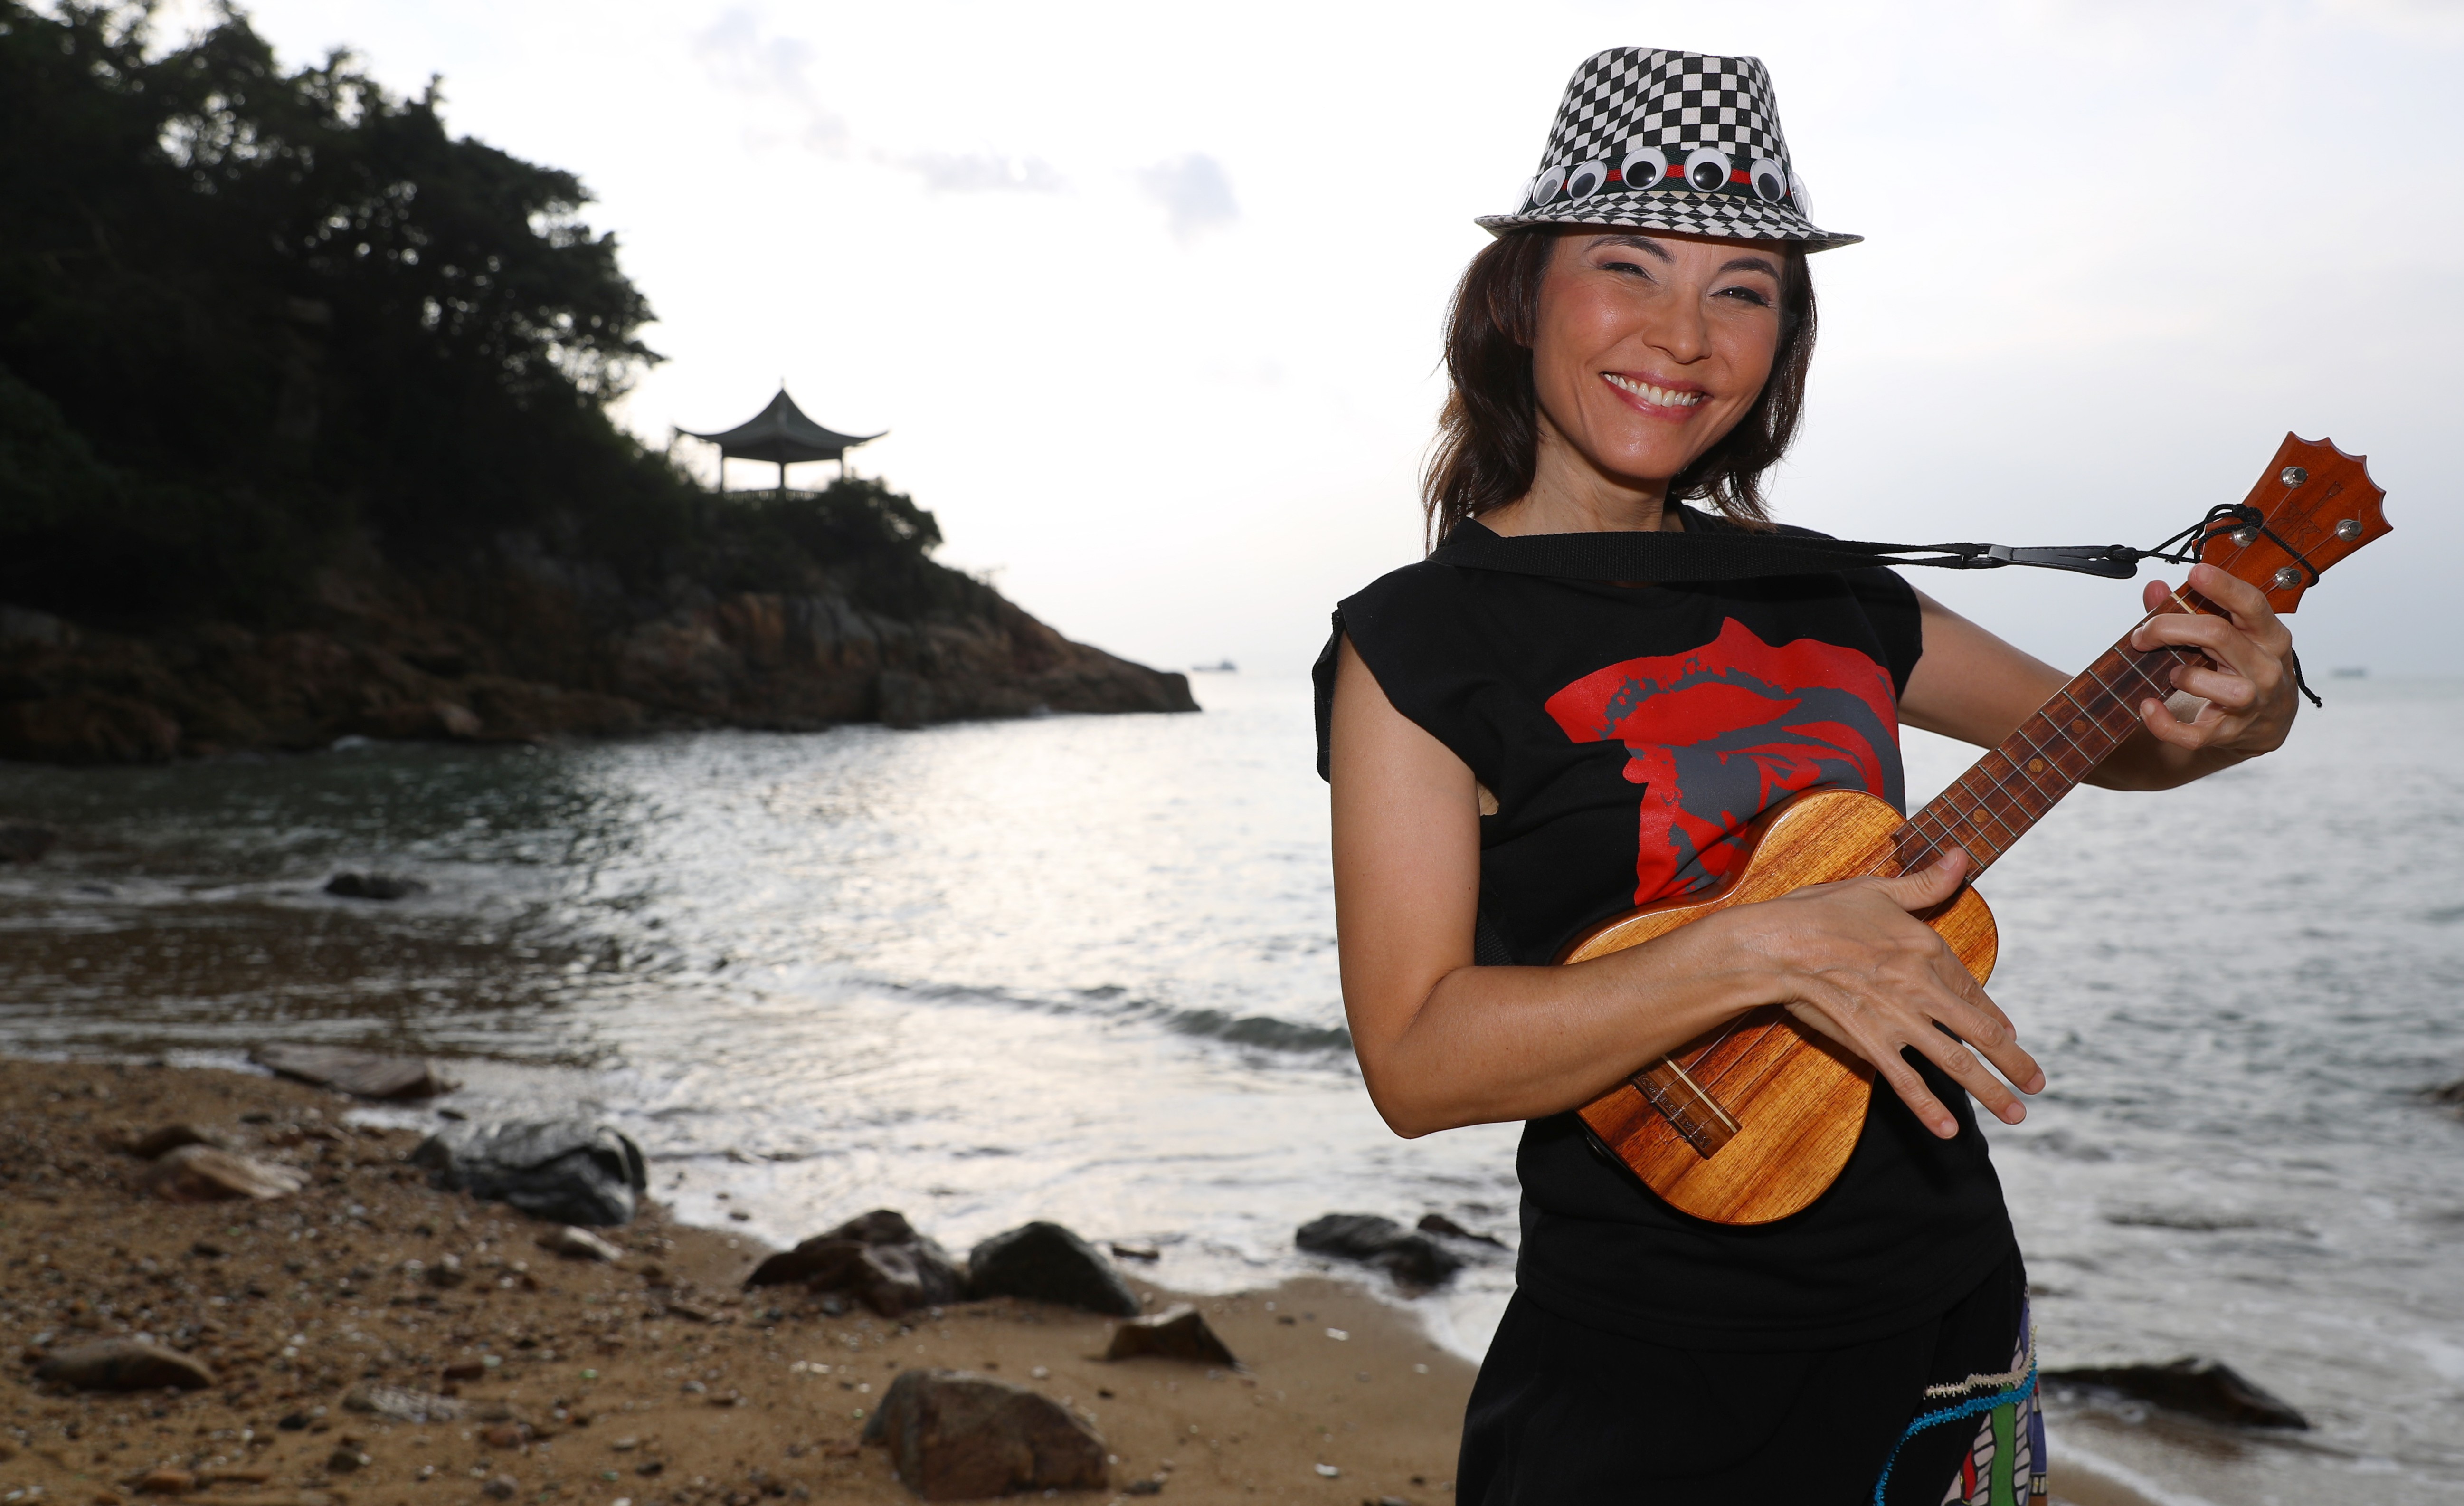 Rose Winebrenner credits a move to Lamma Island with rejuvenating her career. Photo: Edmond So